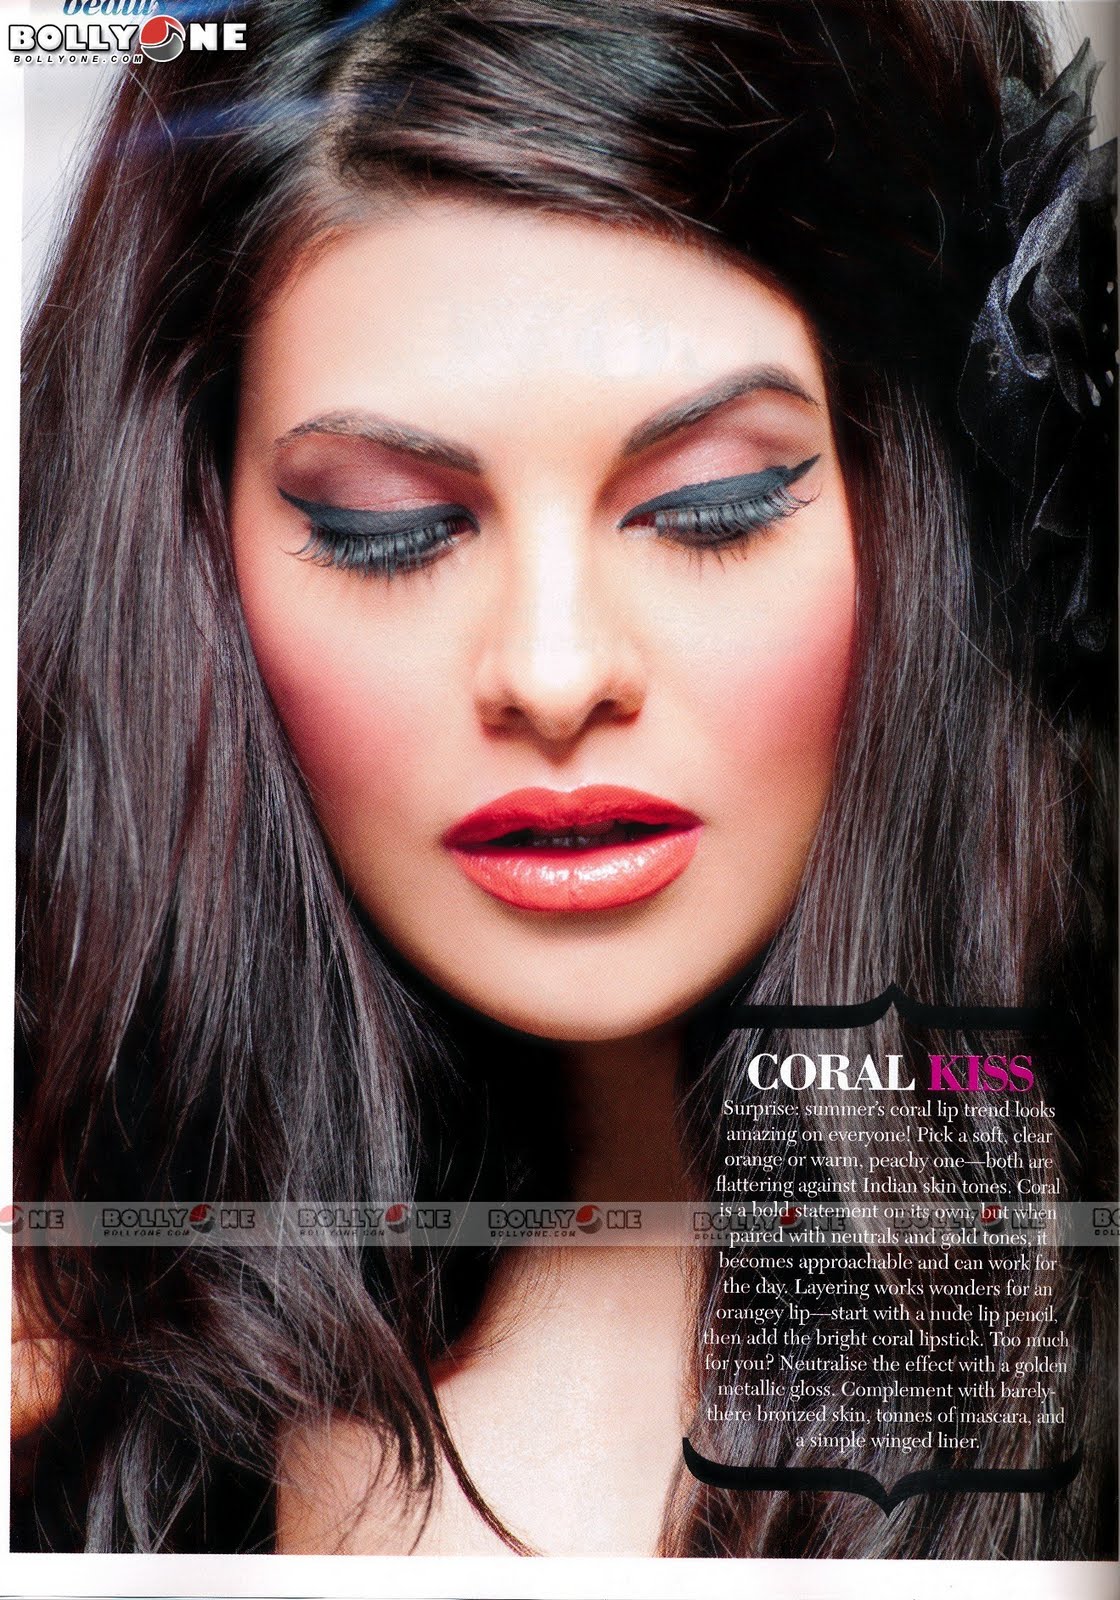  Jacqueline Fernandez -  Jacqueline Fernandez COSMOPOLITAN Magazine May 2011 HQ Pictures